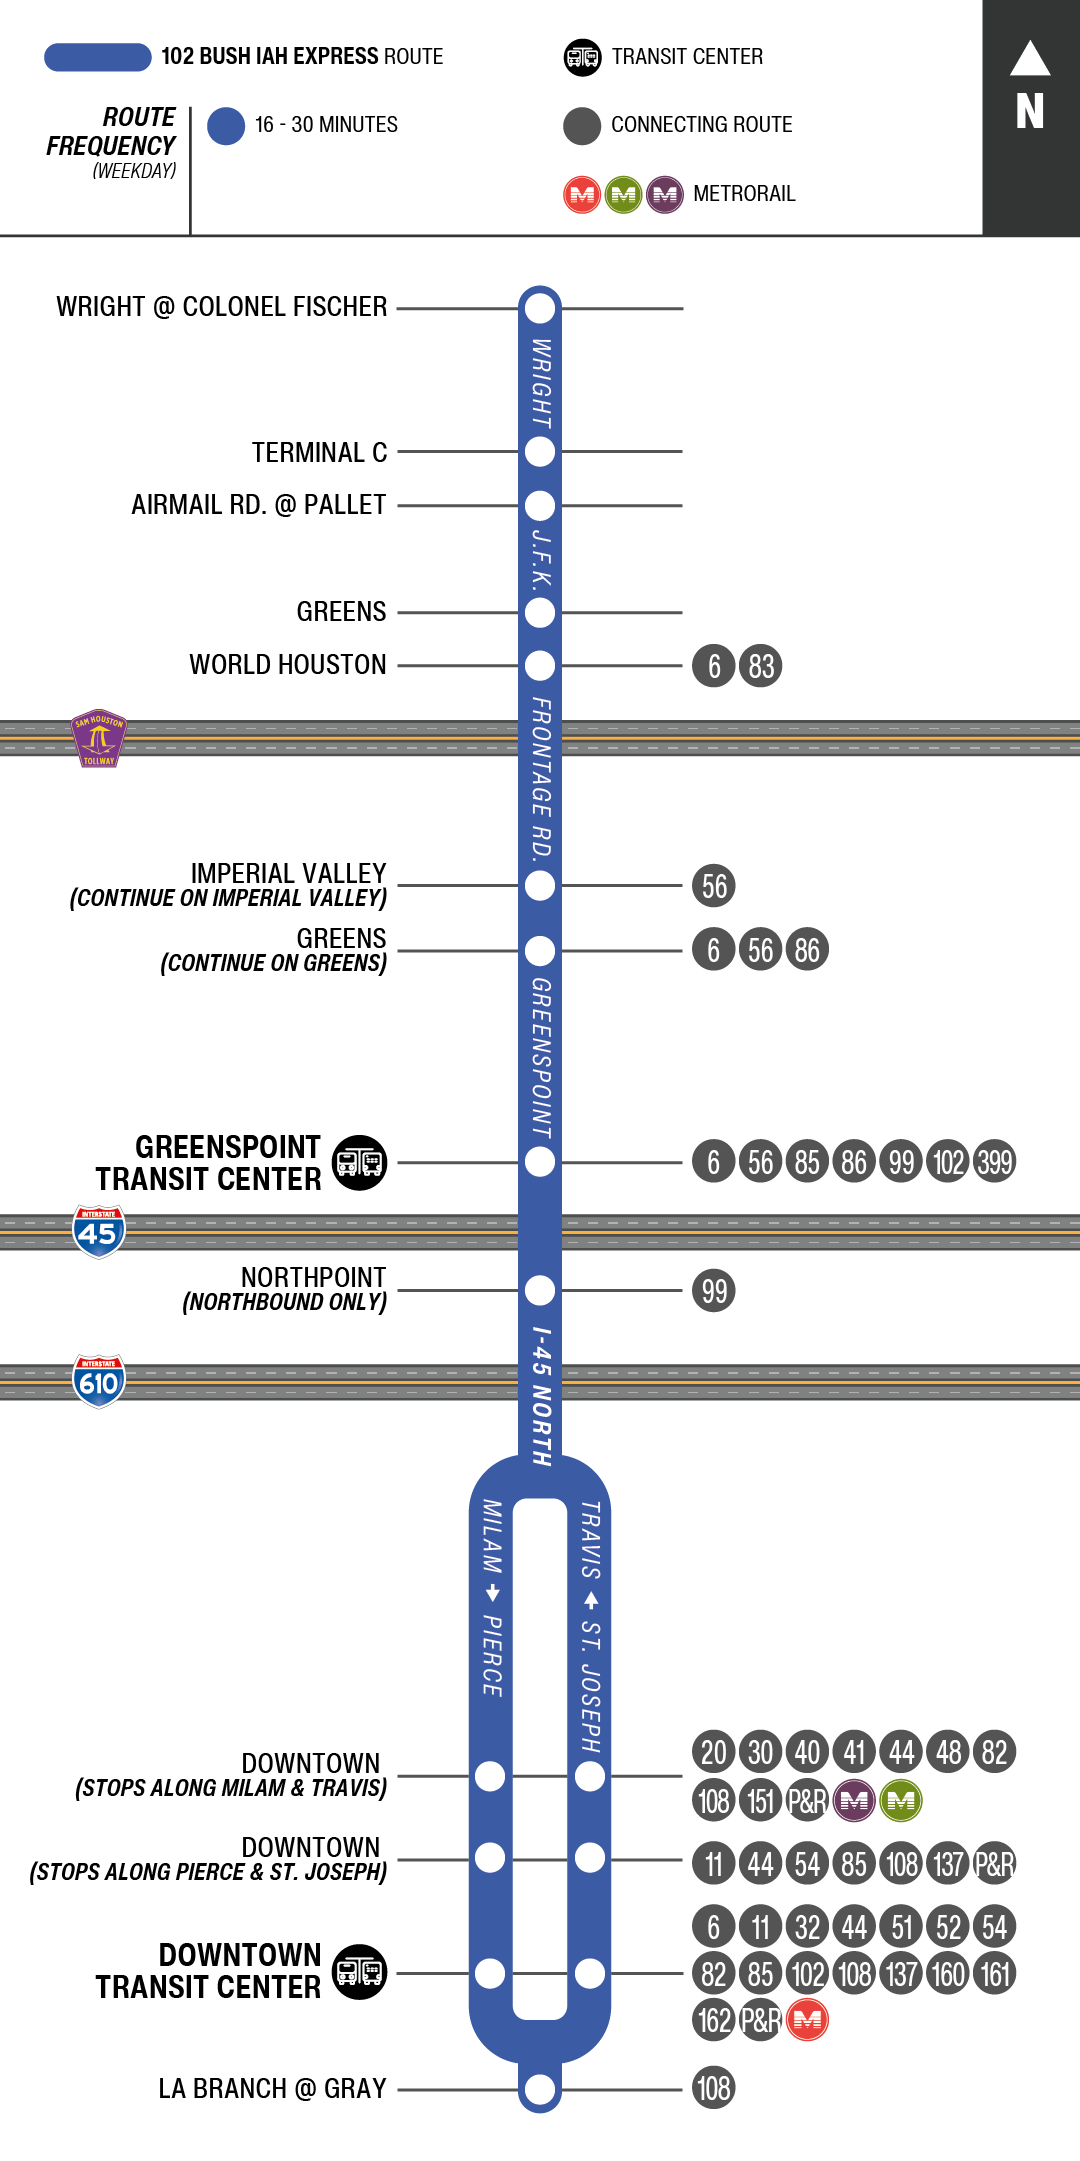 Route map for 102 Bush IAH Express bus